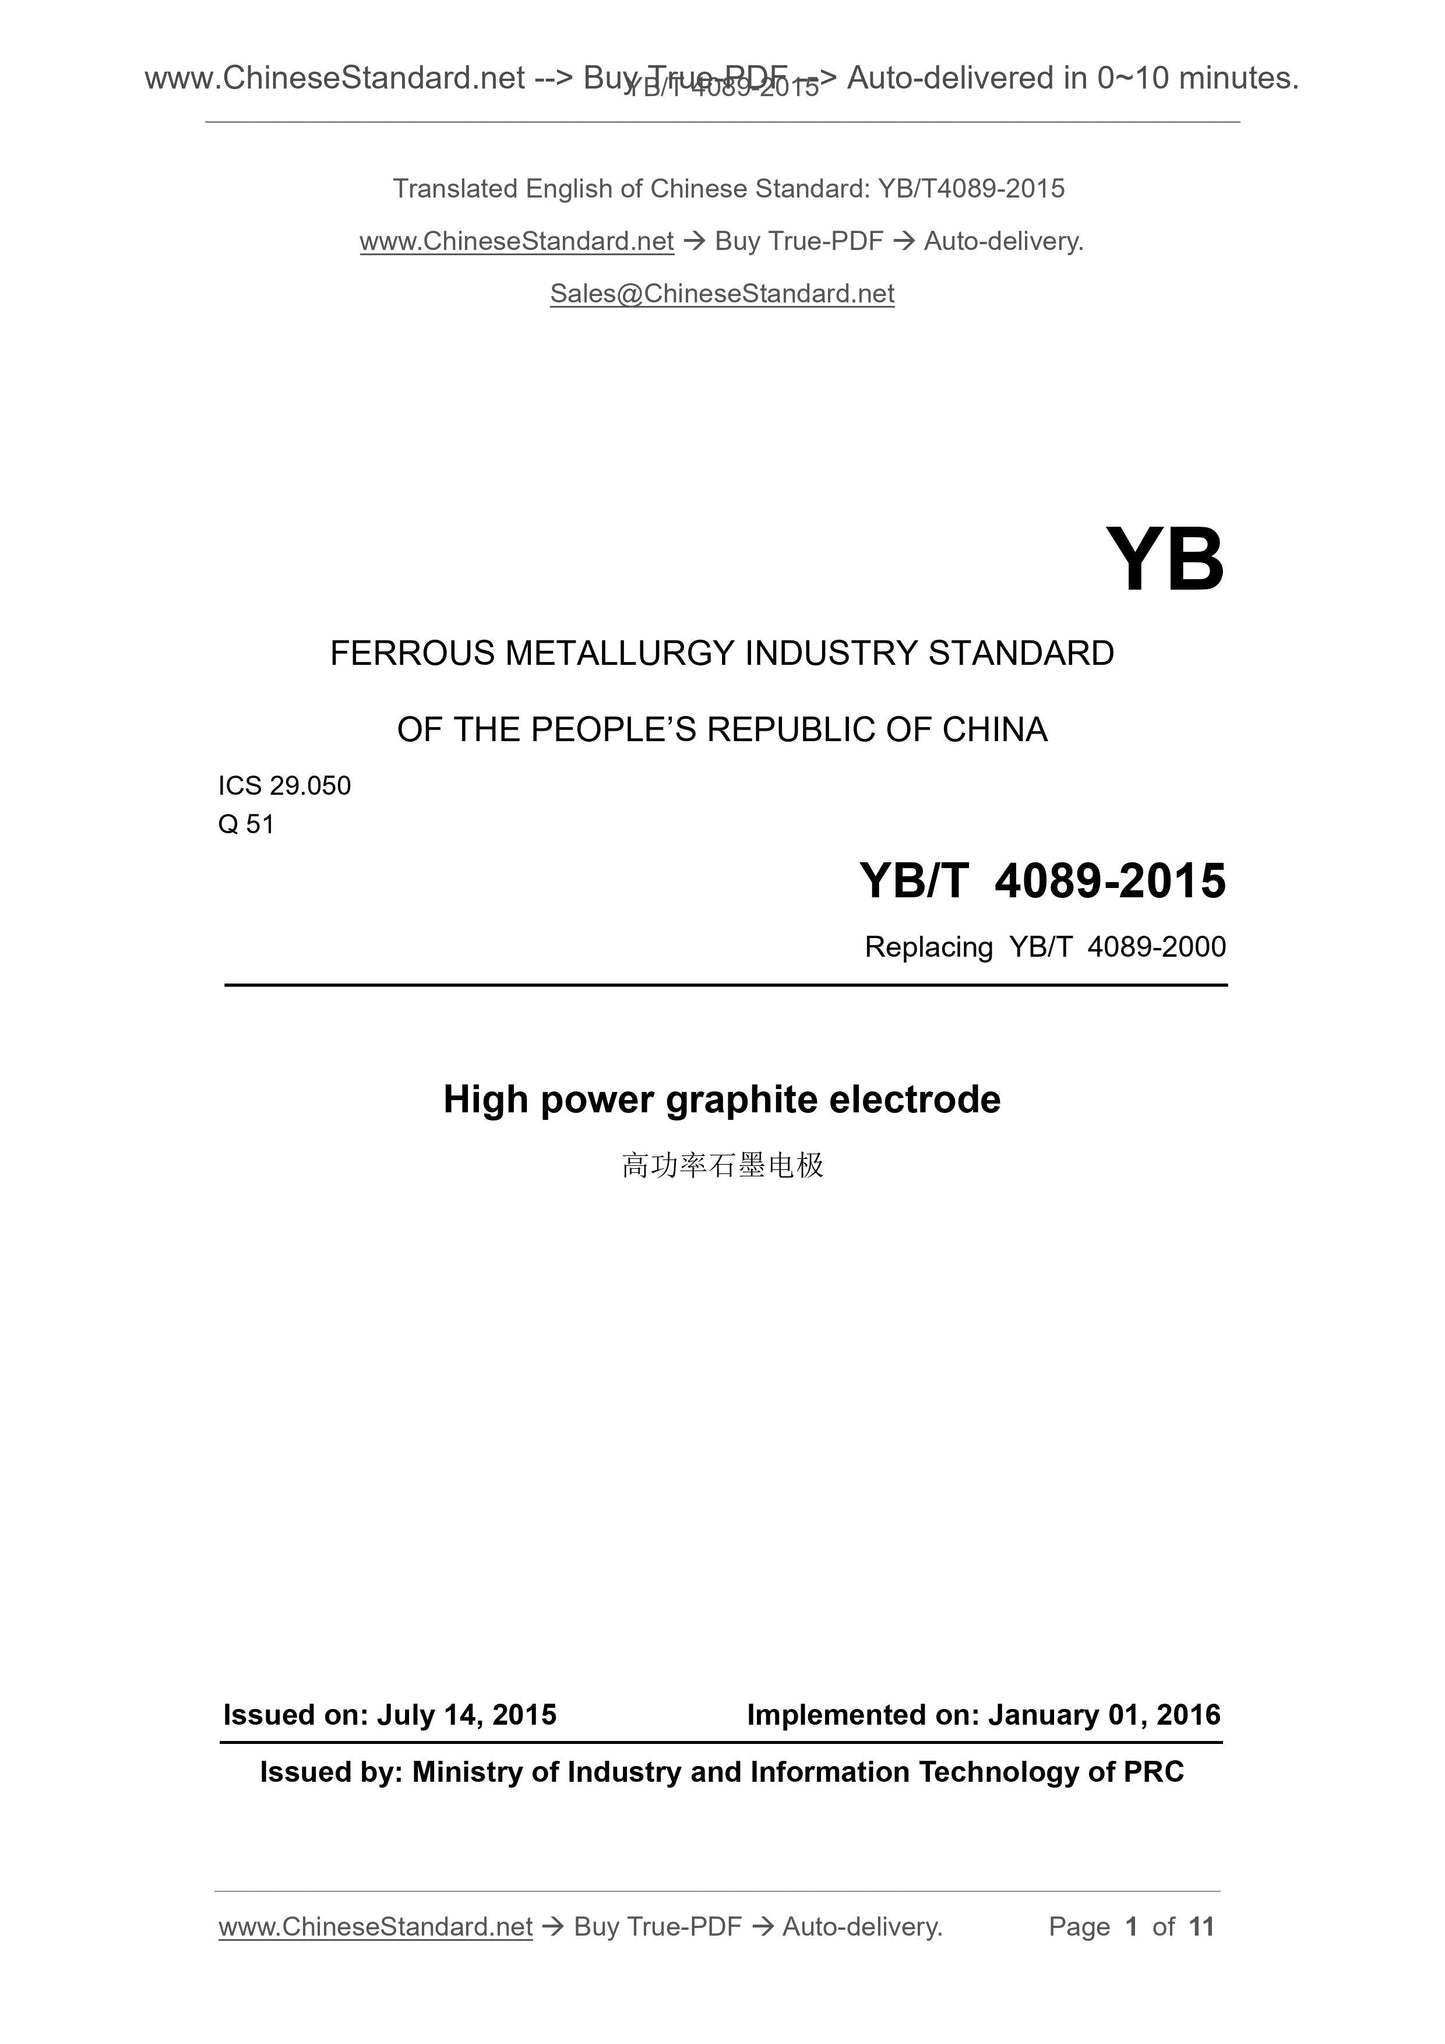 YB/T 4089-2015 Page 1